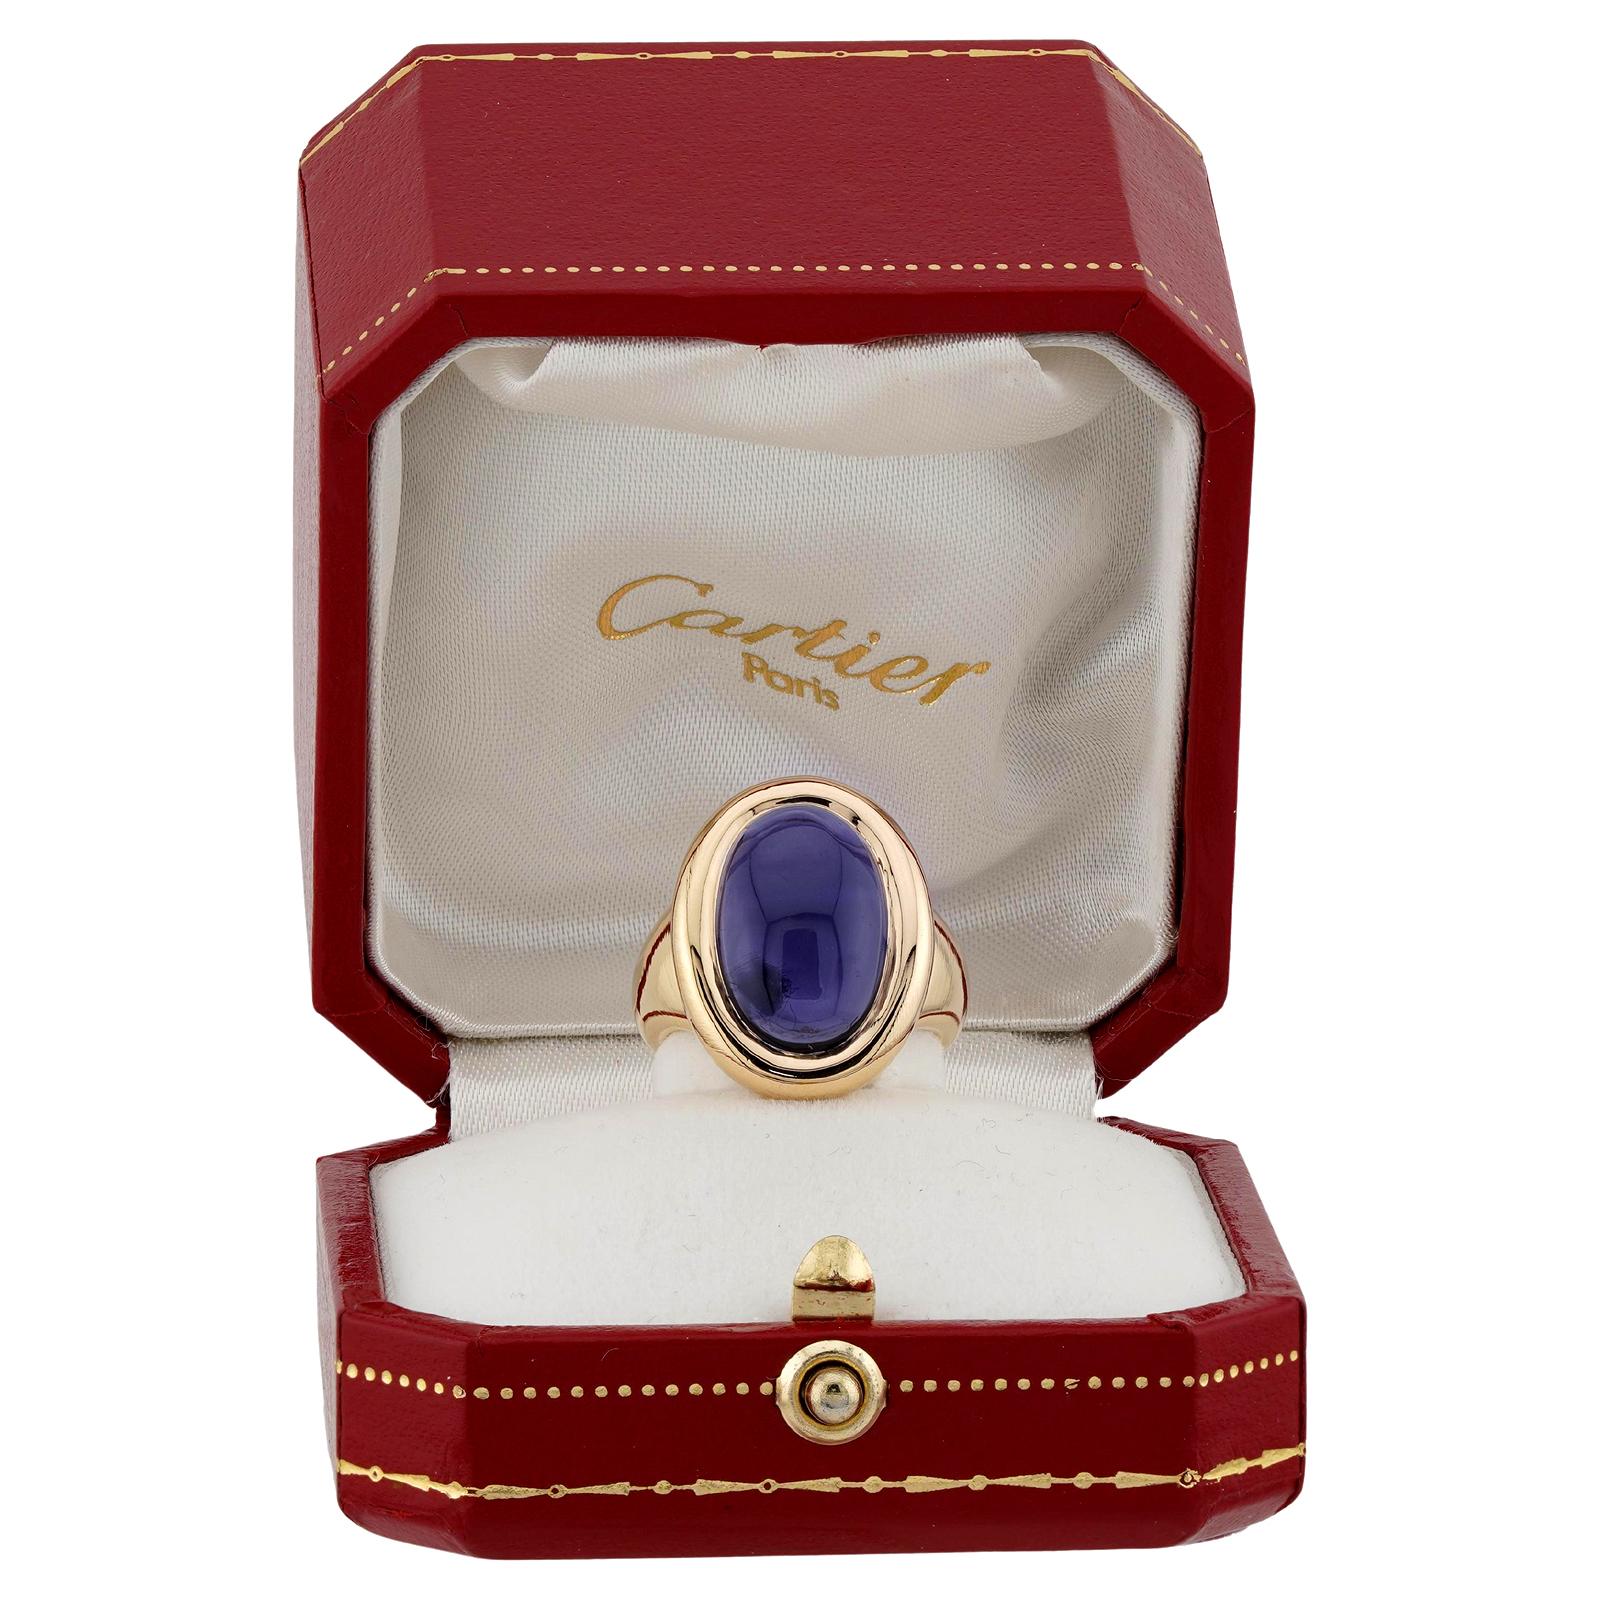 This gorgeous authentic Cartier ring is crafted in 18k yellow gold and bezel-set with an oval purple iolite. Made in France circa 1994. Measurements: 0.47